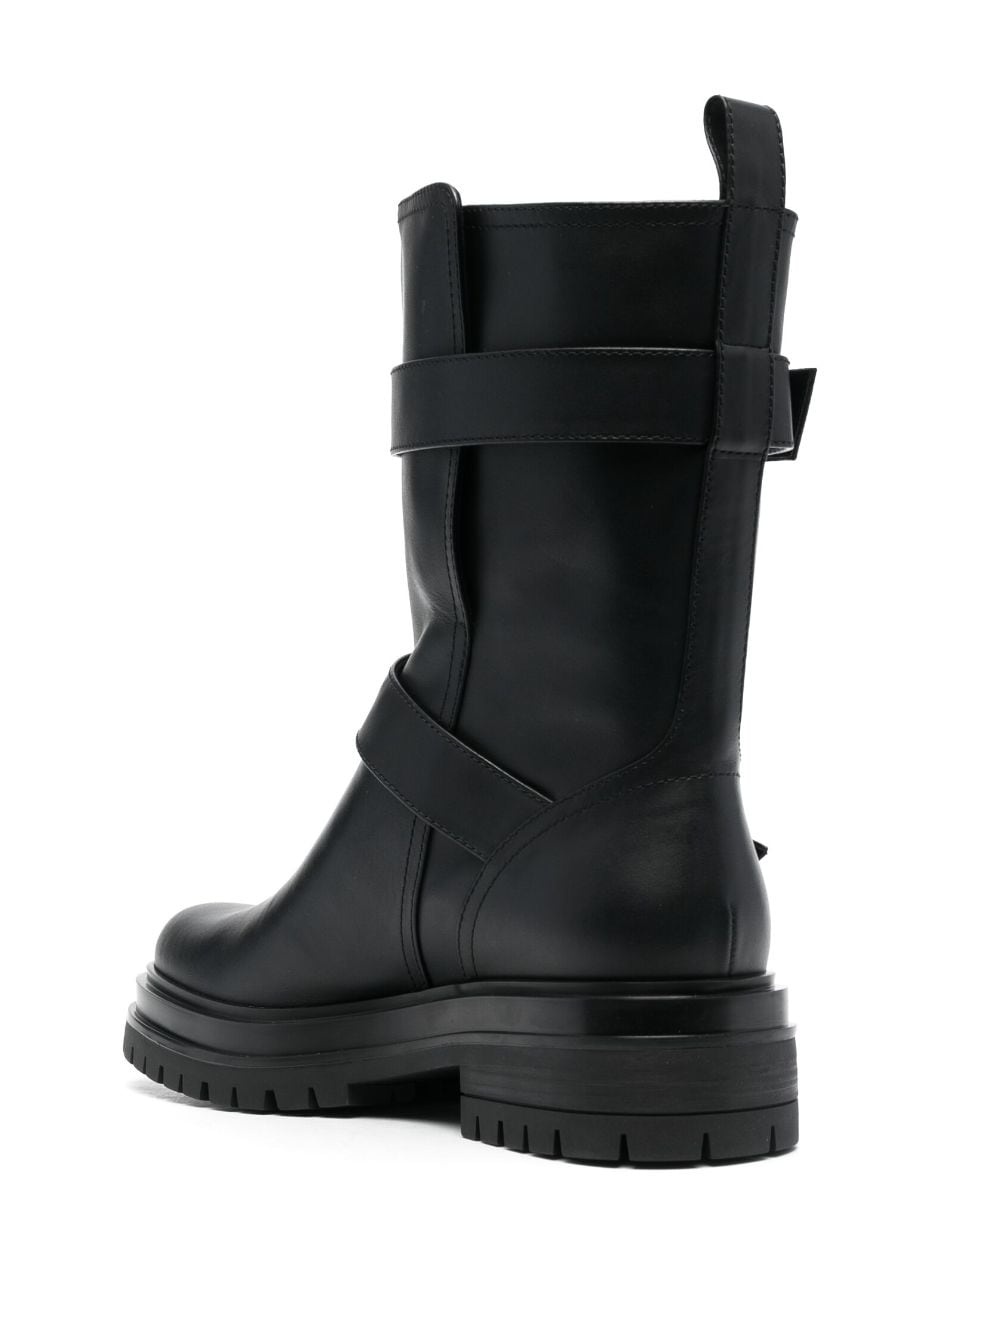 Amphibian buckled ankle boots - 3